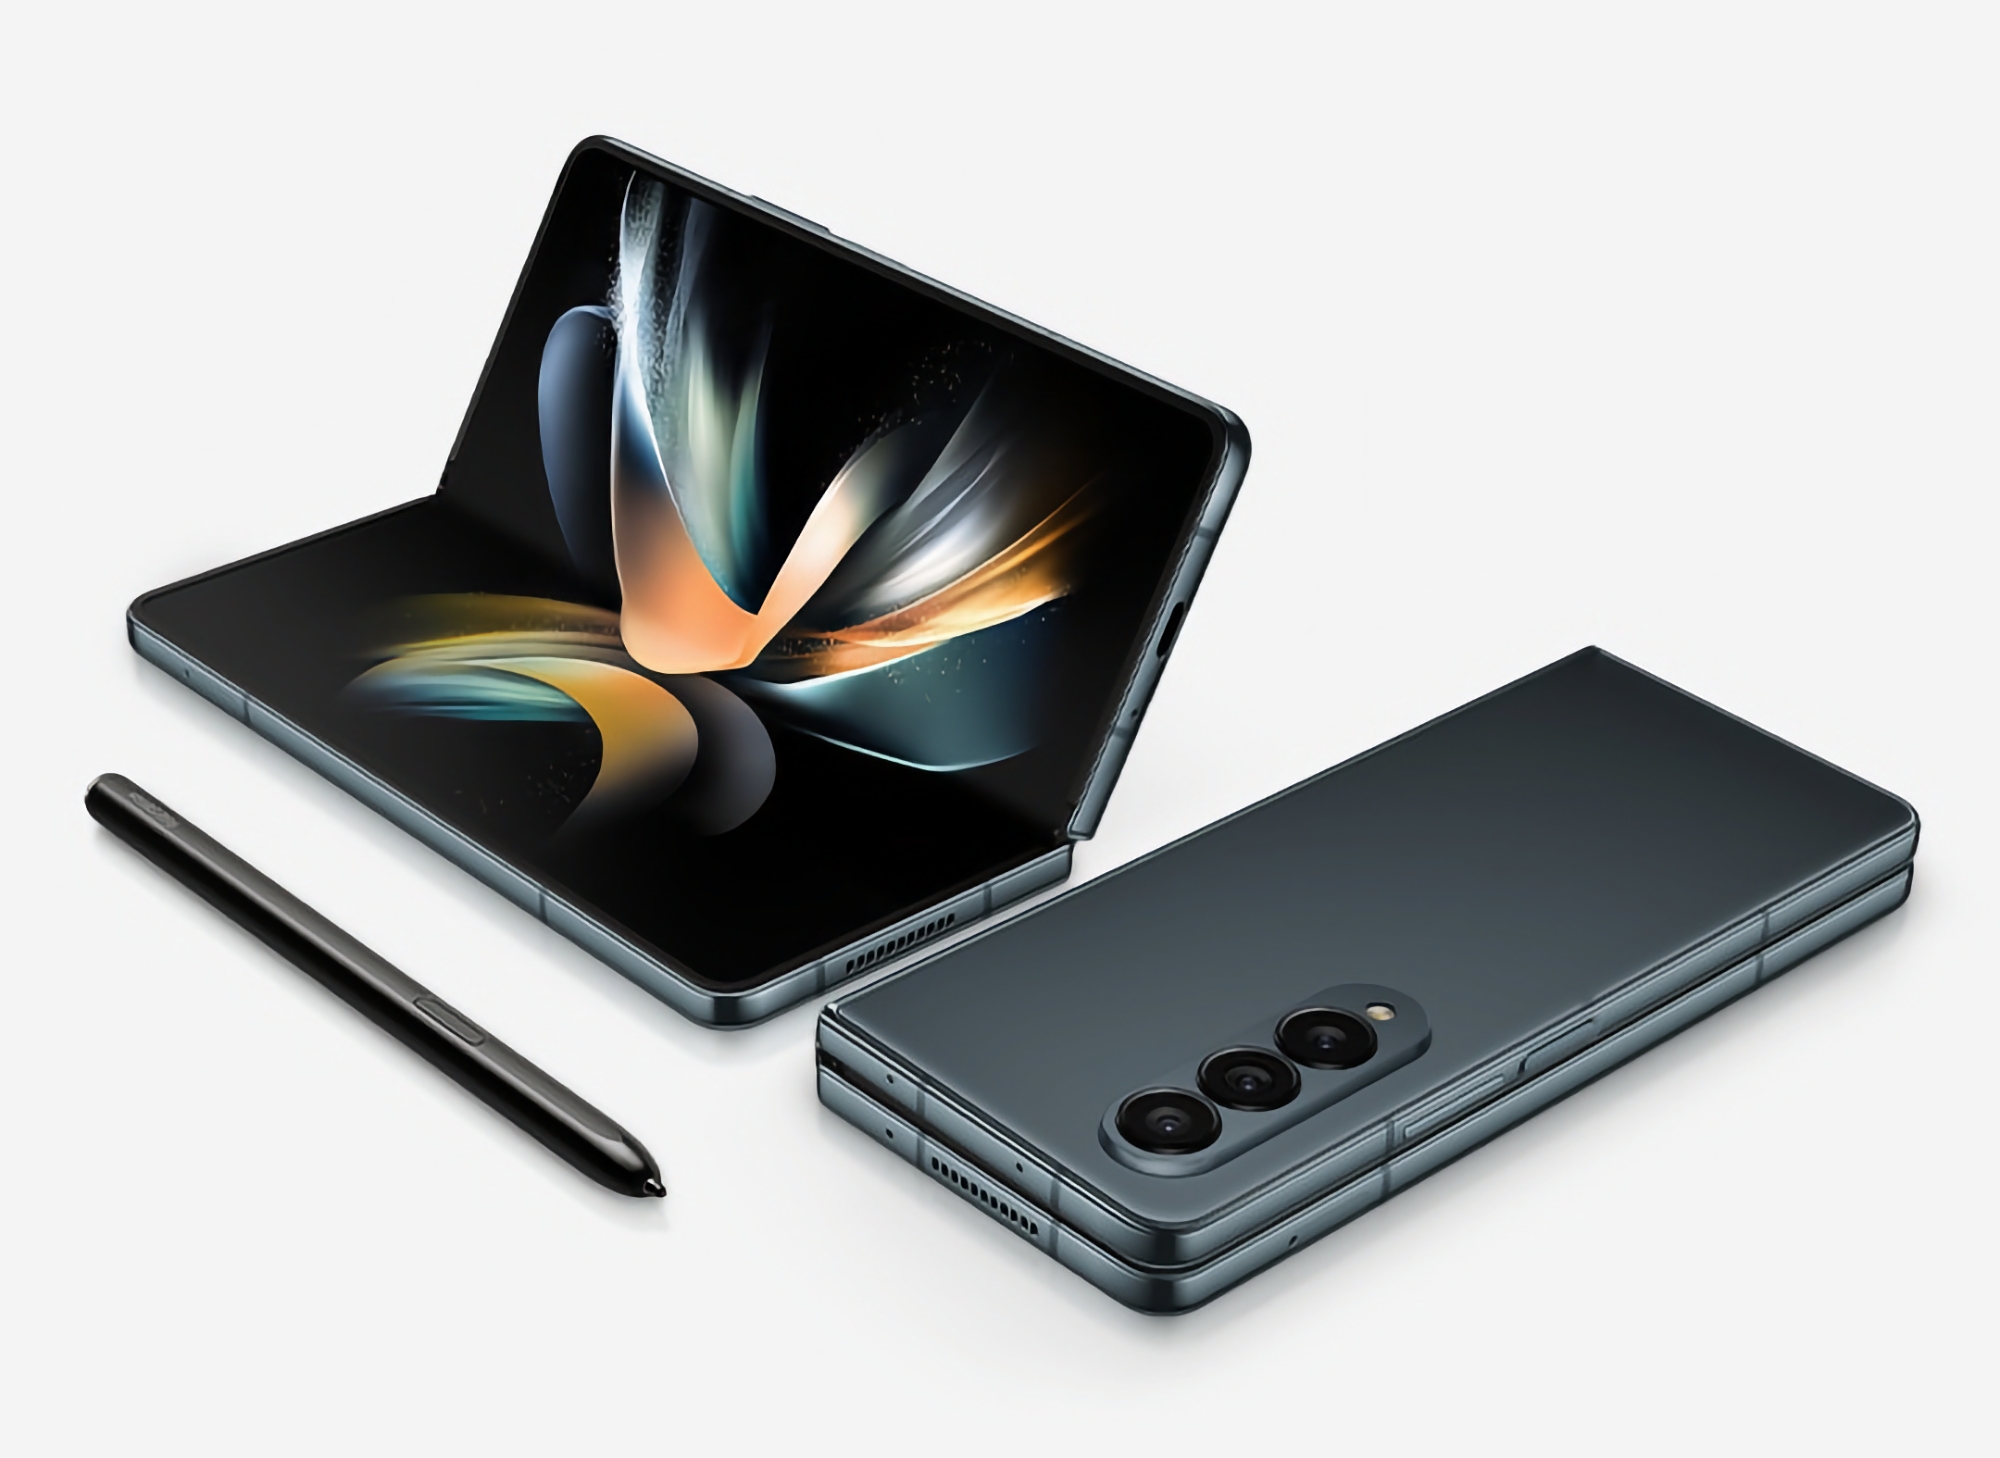 No change: the Samsung Galaxy Fold 5 foldable smartphone will get the same external display as the Galaxy Fold 4